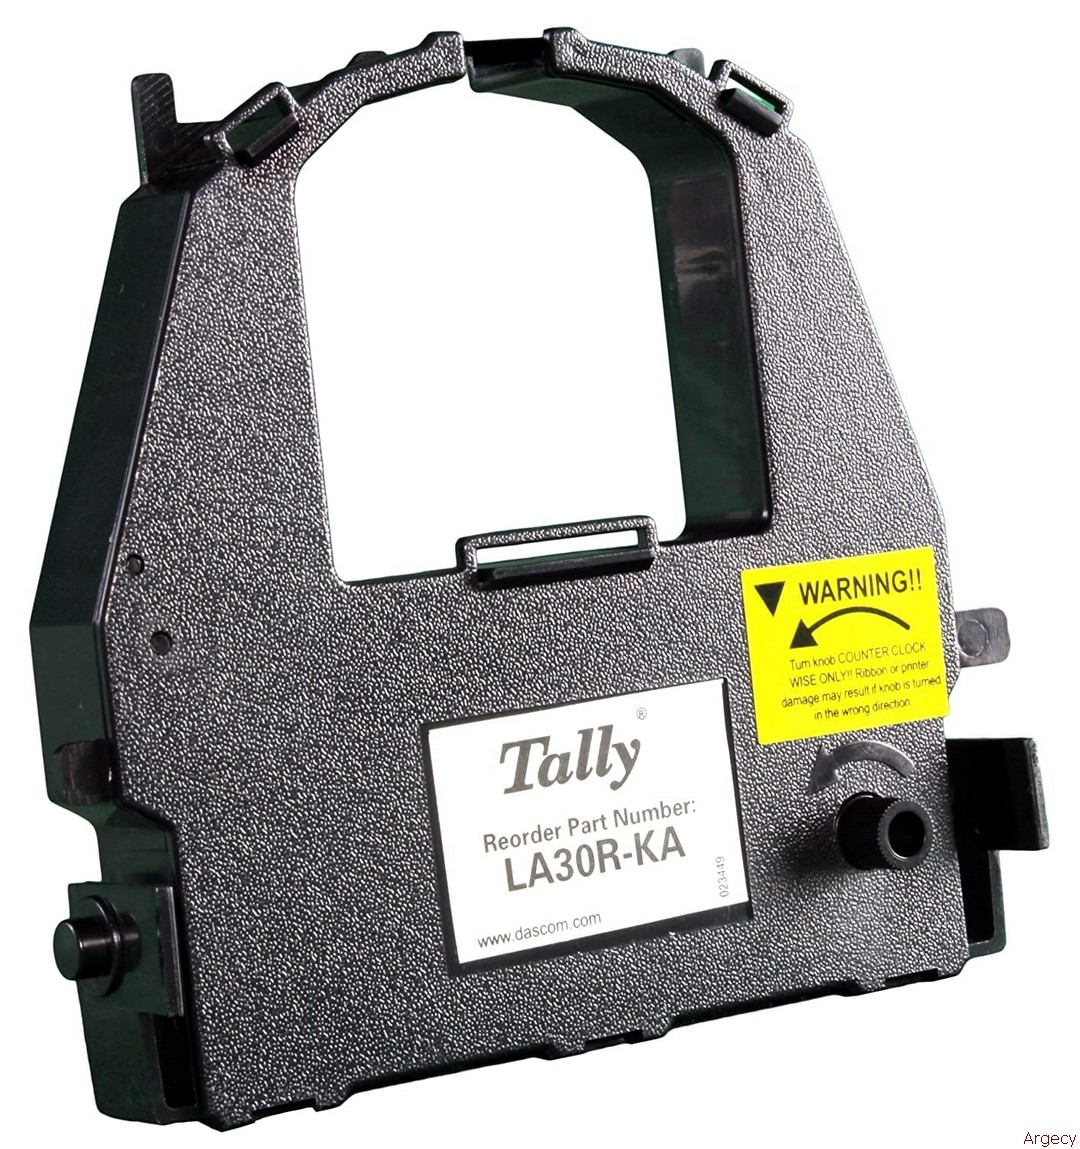 Dascom (Tally) LA30R-KA 6-pack (New) - purchase from Argecy